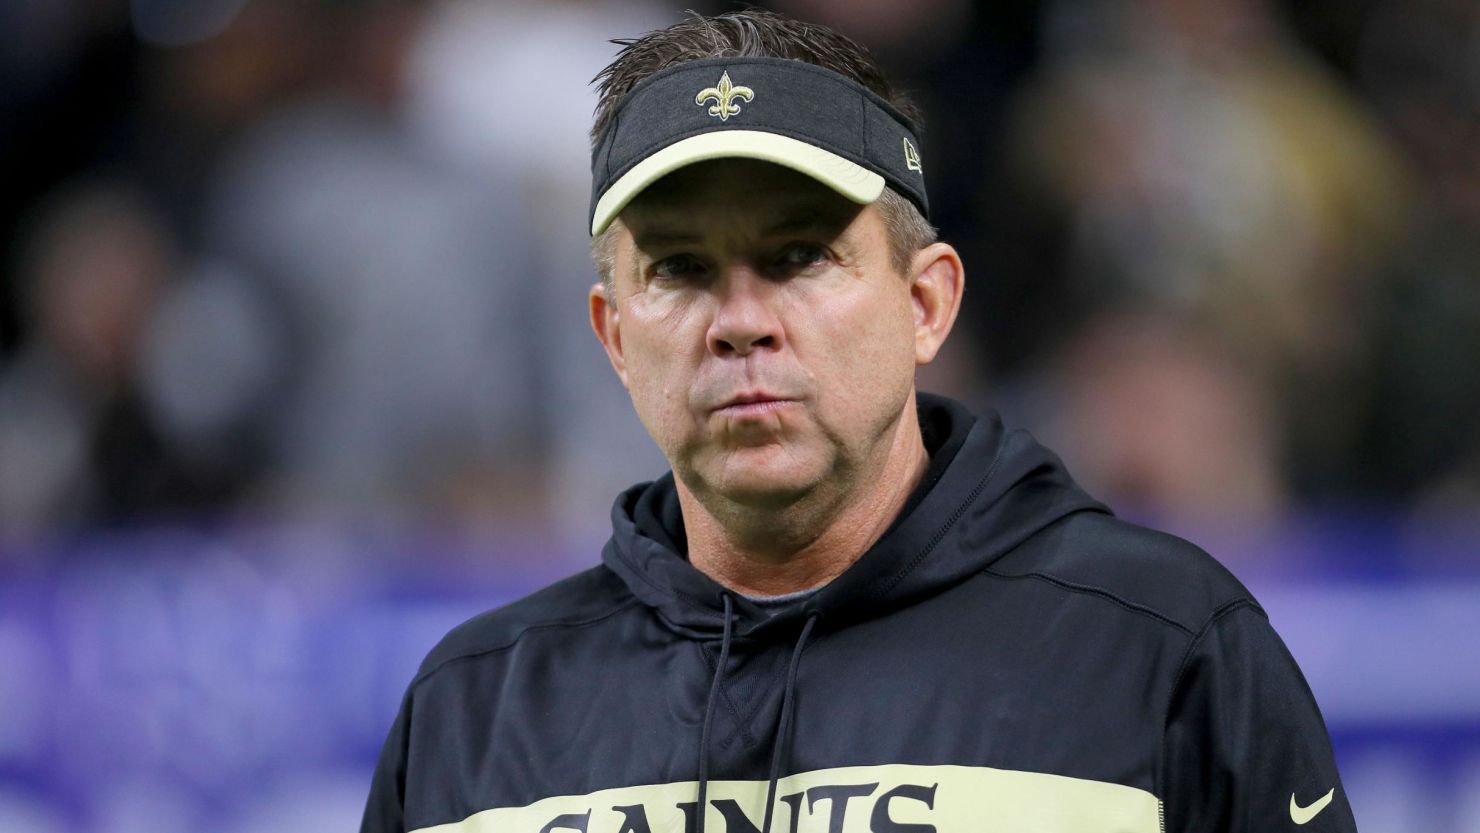 New Orleans Saints coach Sean Payton of the New Orleans Saints looks on before the 2019 NFC championship game.